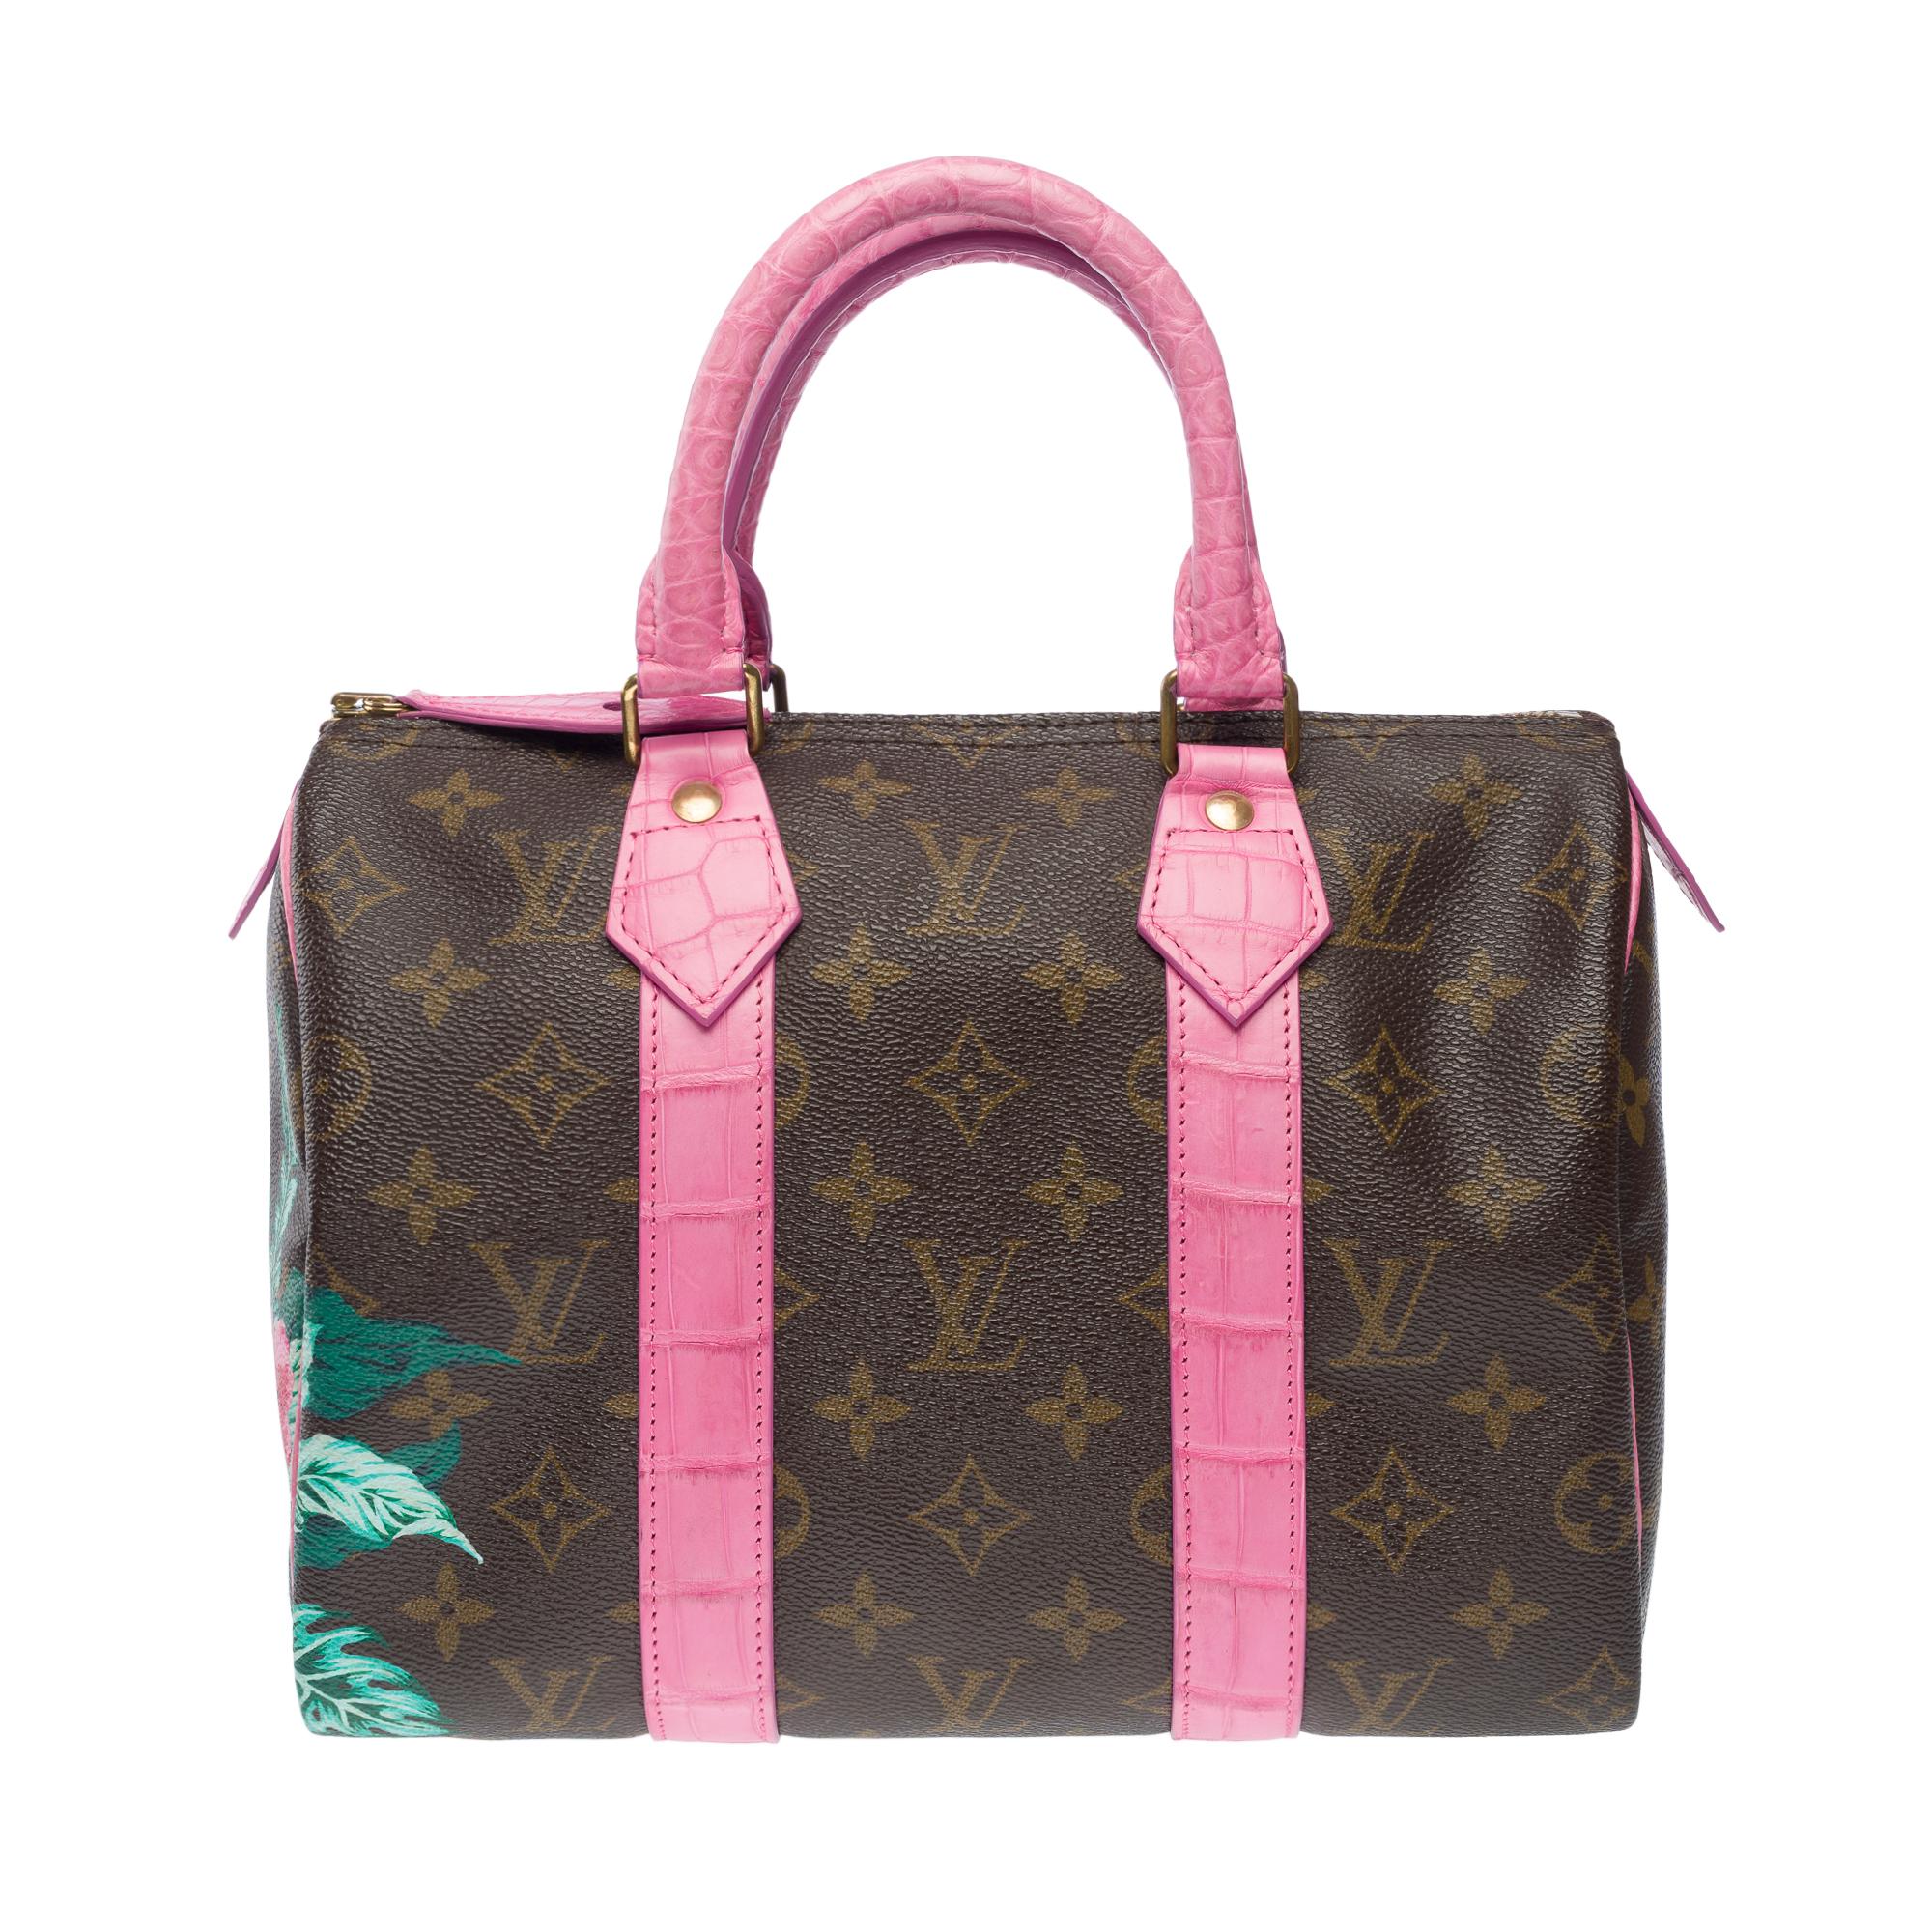 Customized Louis Vuitton Speedy 25 handbag Flowers with Pink Crocodile leather In Good Condition For Sale In Paris, IDF